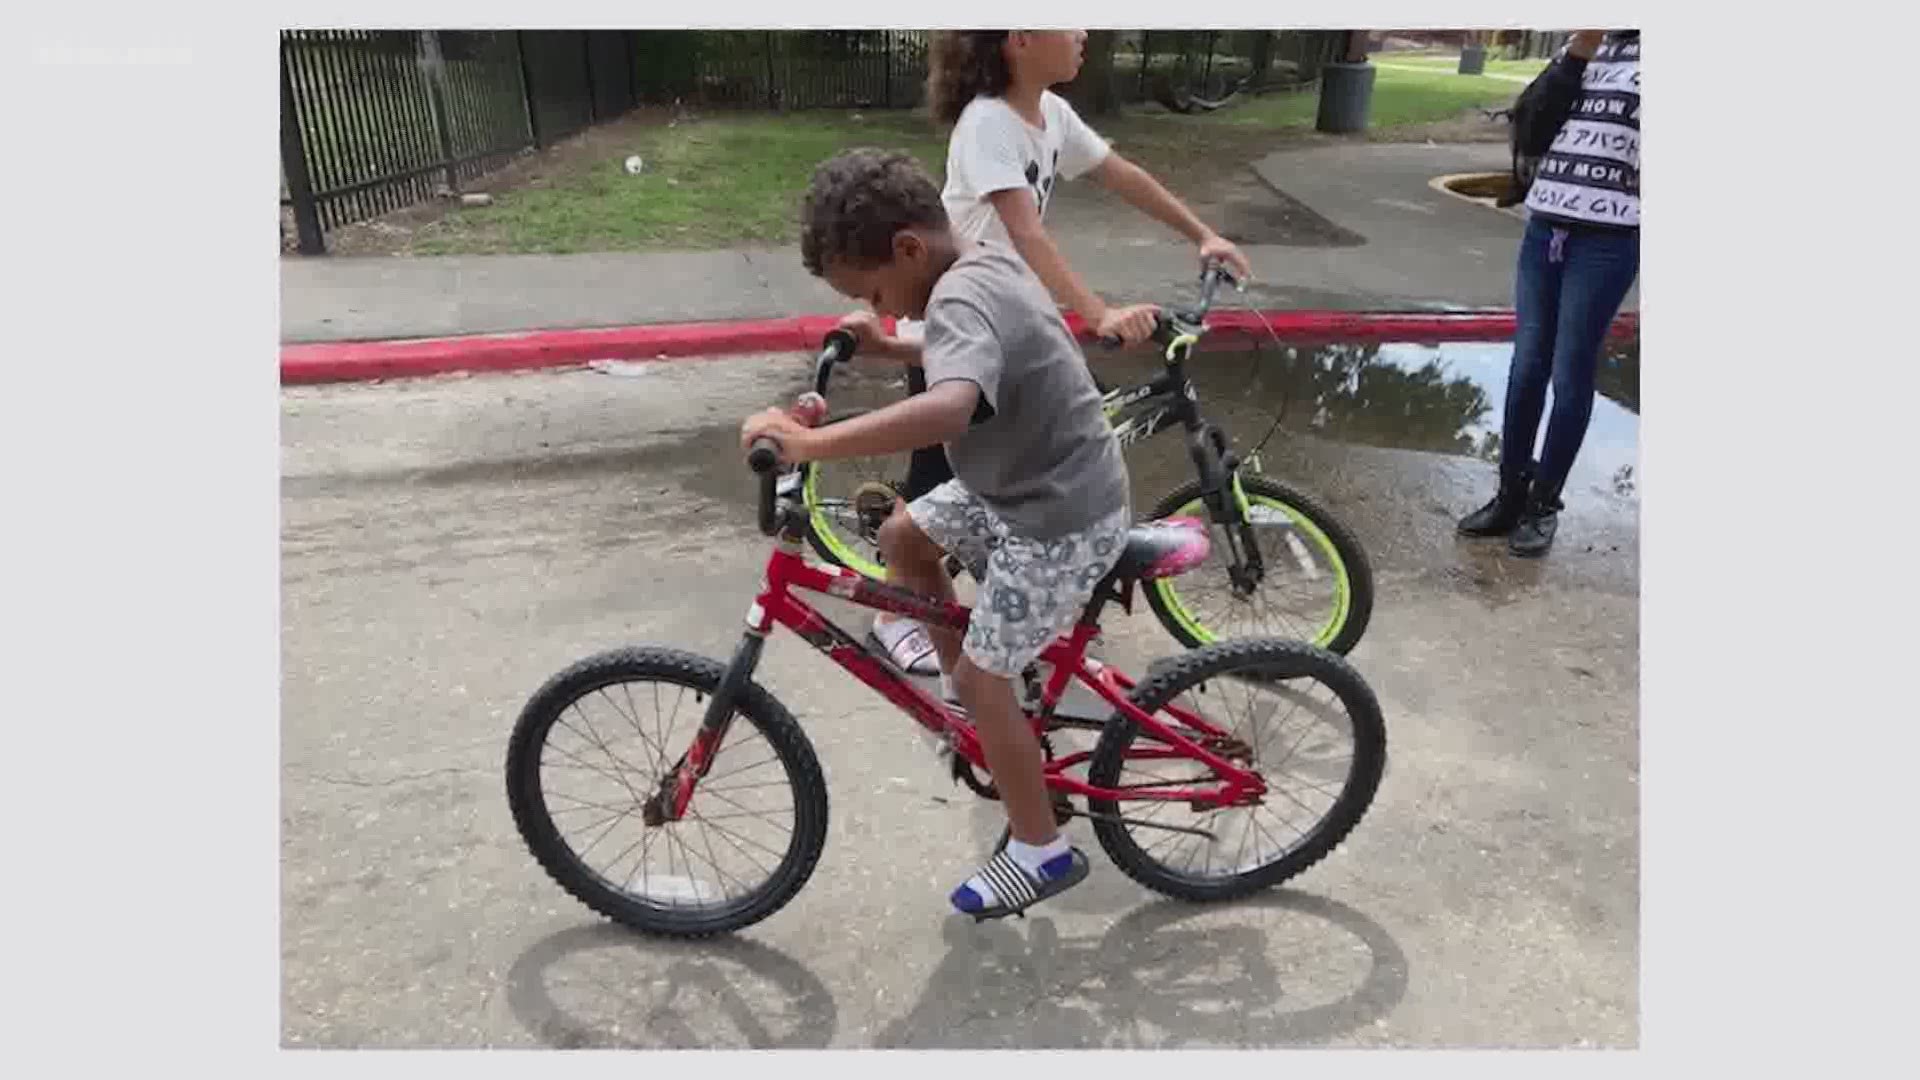 A Houston family spends their free time refurbishing old, broken bicycles for those in need.